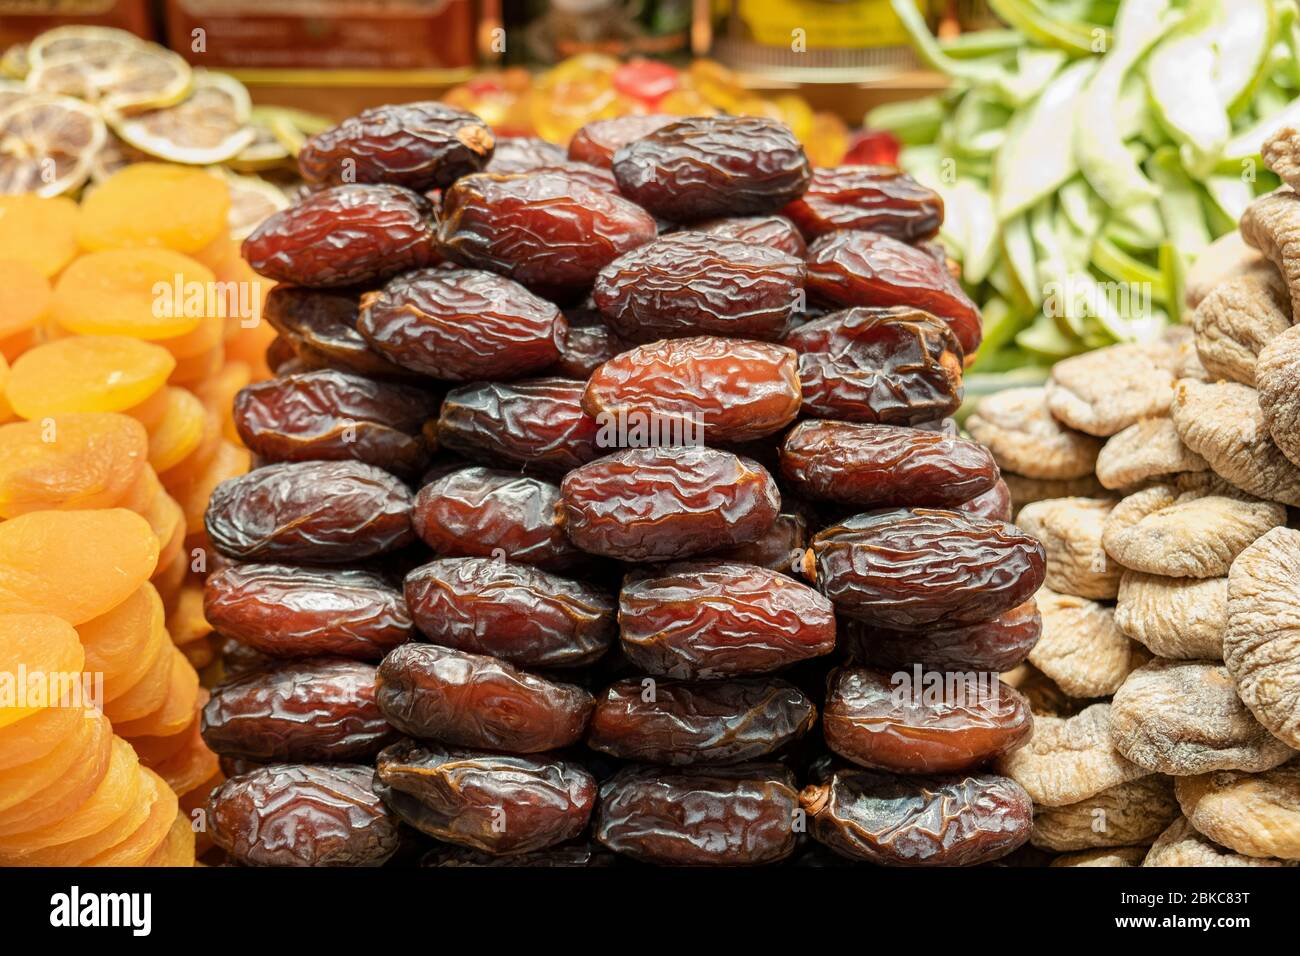 Date fruit ( hurma ). Delicious and sweet snack for sale in spice bazaar. Traditional and exotic food. Special food for ramadan. Stock Photo